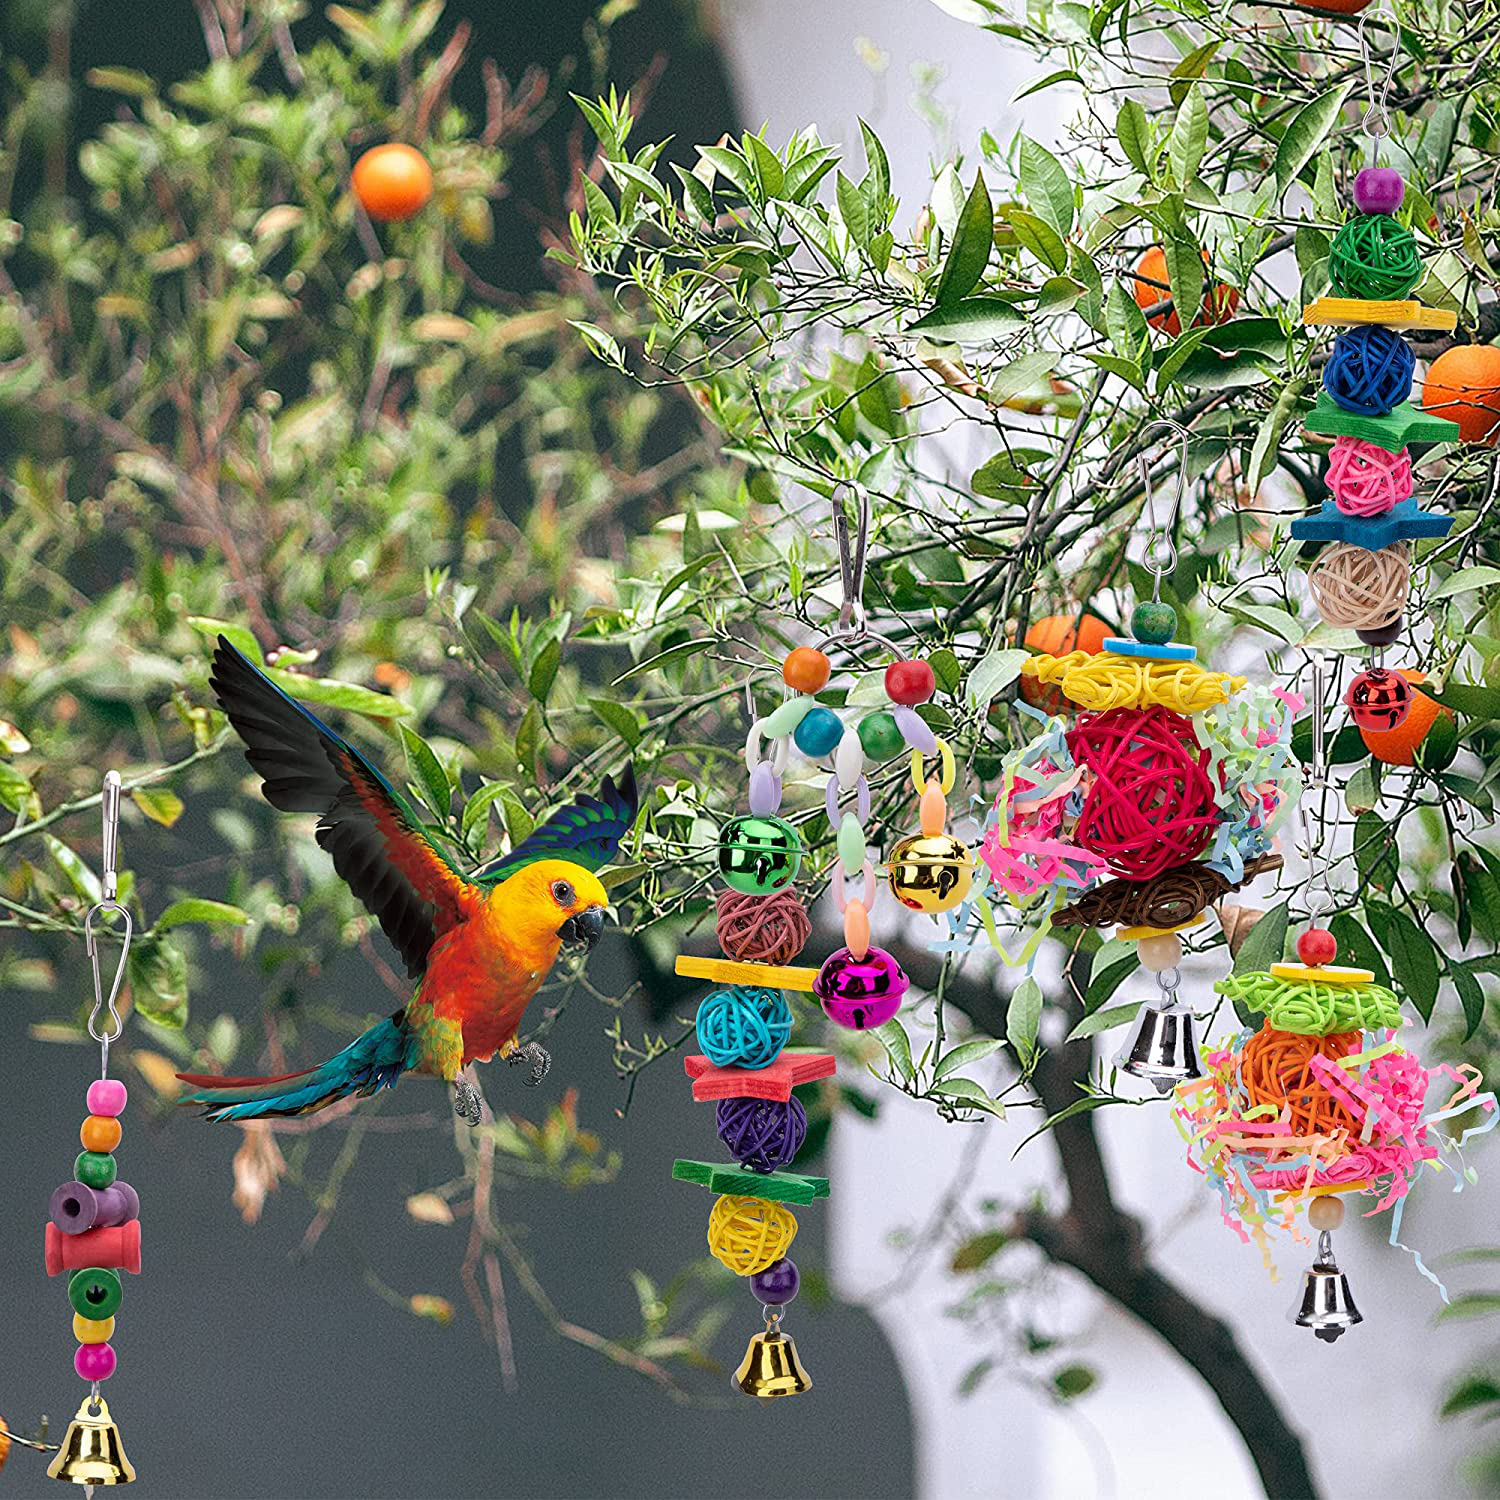 Ebaokuup 10 Packs Bird Swing Chewing Toys- Parrot Hammock Bell Toys Parrot Cage Toy Bird Perch with Wood Beads Hanging for Small Parakeets, Cockatiels, Conures, Finches,Budgie,Parrots, Love Birds